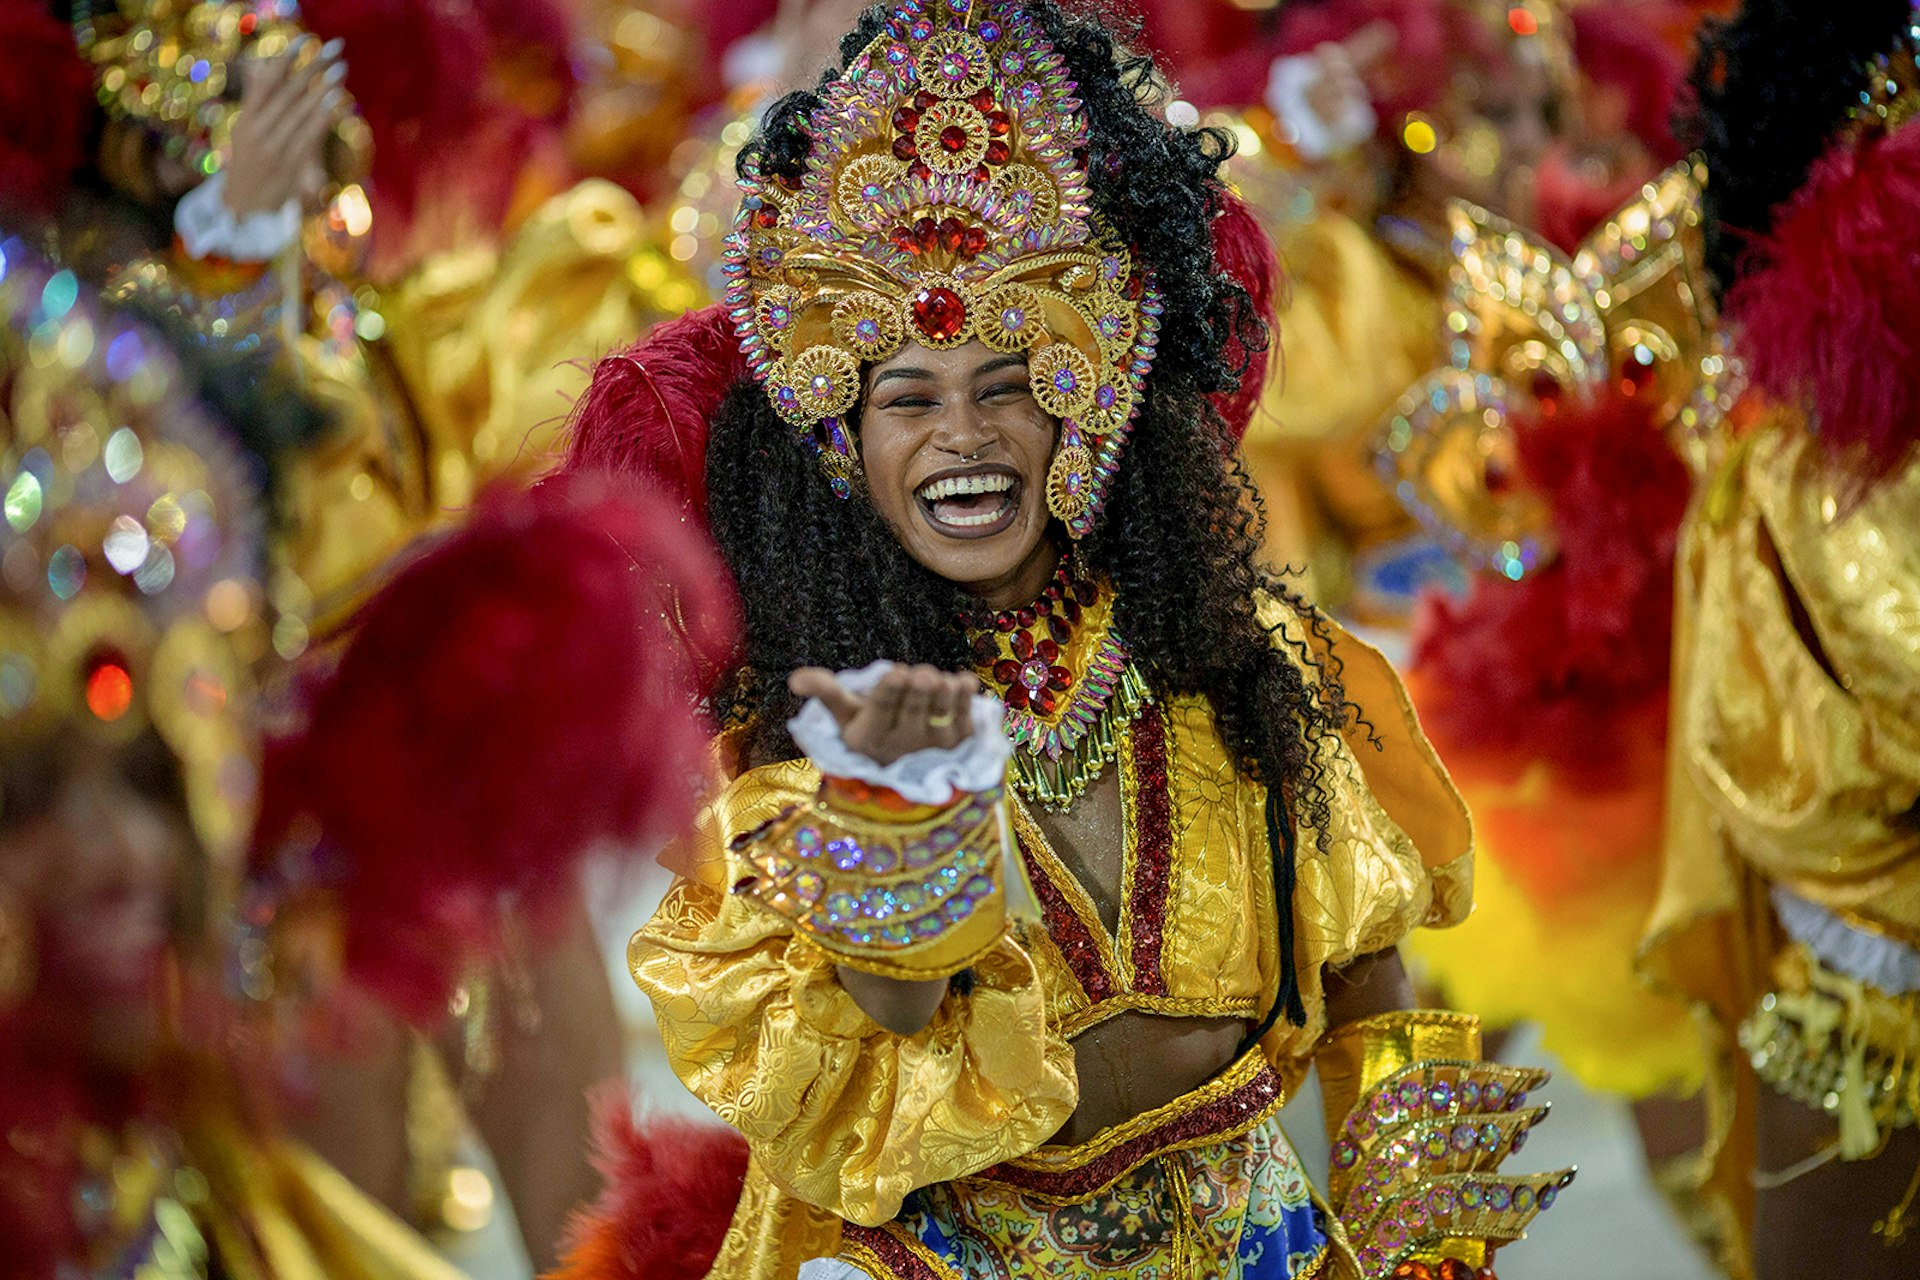 A woman dressed in a yellow and red Carnival costume blows a kiss at the camera